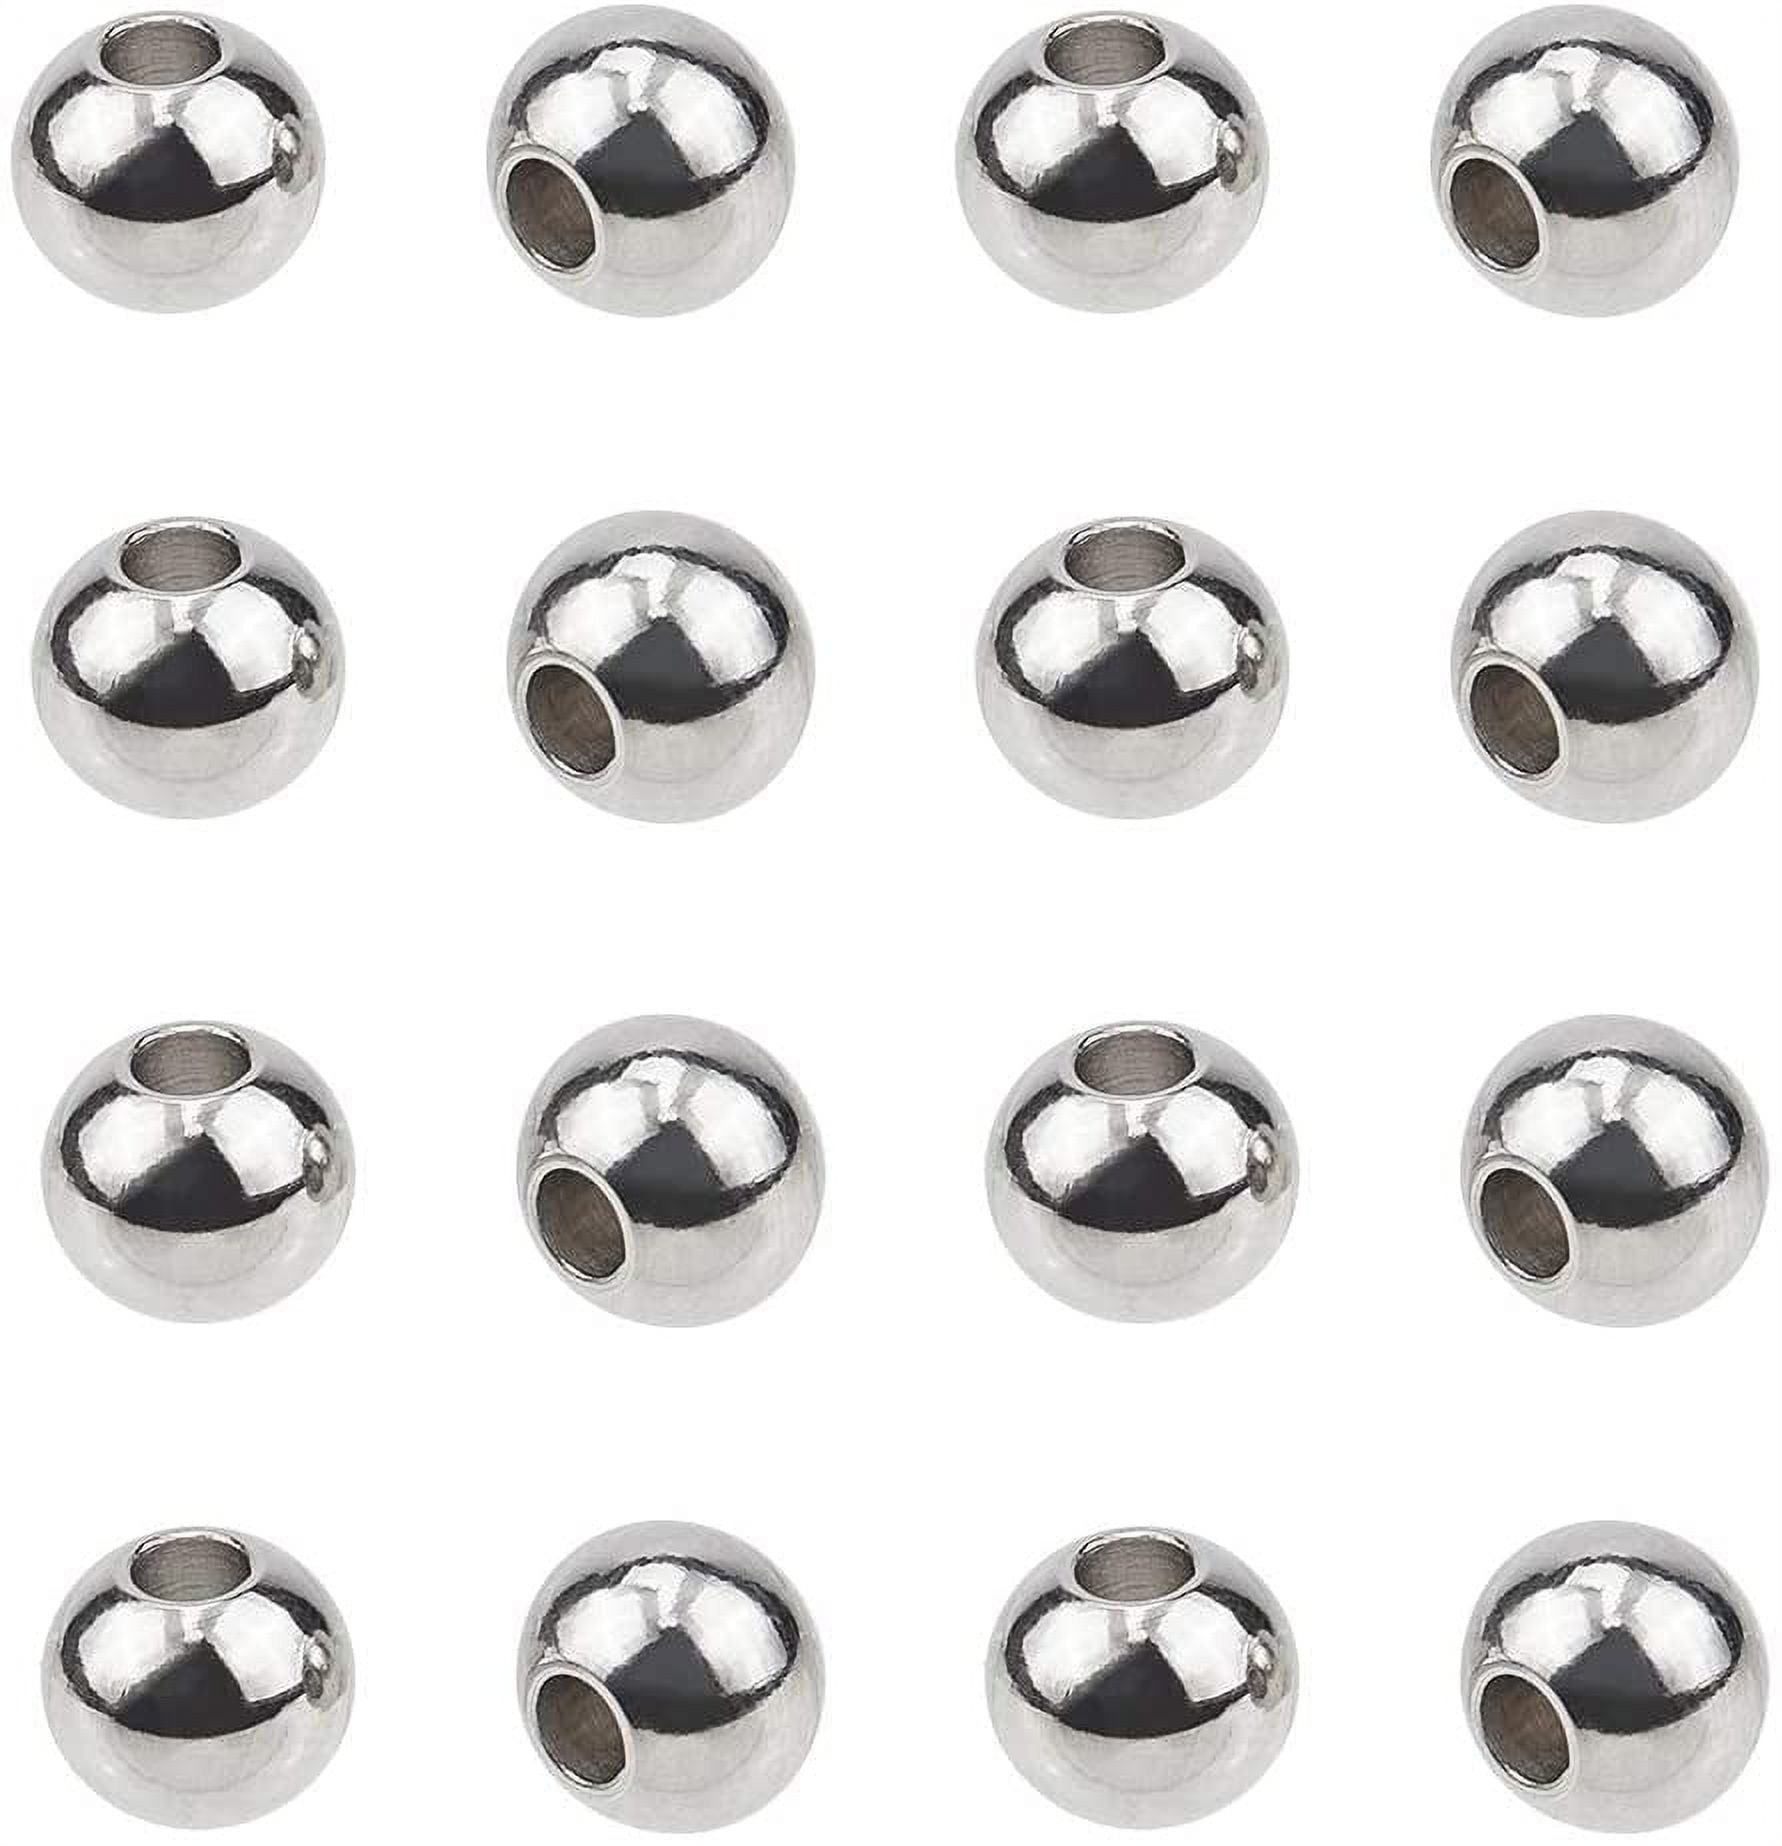 Shop UNICRAFTALE About 80pcs Apetalous Spacer Bead Caps Stainless Steel Bead  Cap Spacers Golden End Cap Jewelry Making Metal Bead Caps for Bracelet  Necklace Jewelry Making 6mm Diameter for Jewelry Making 